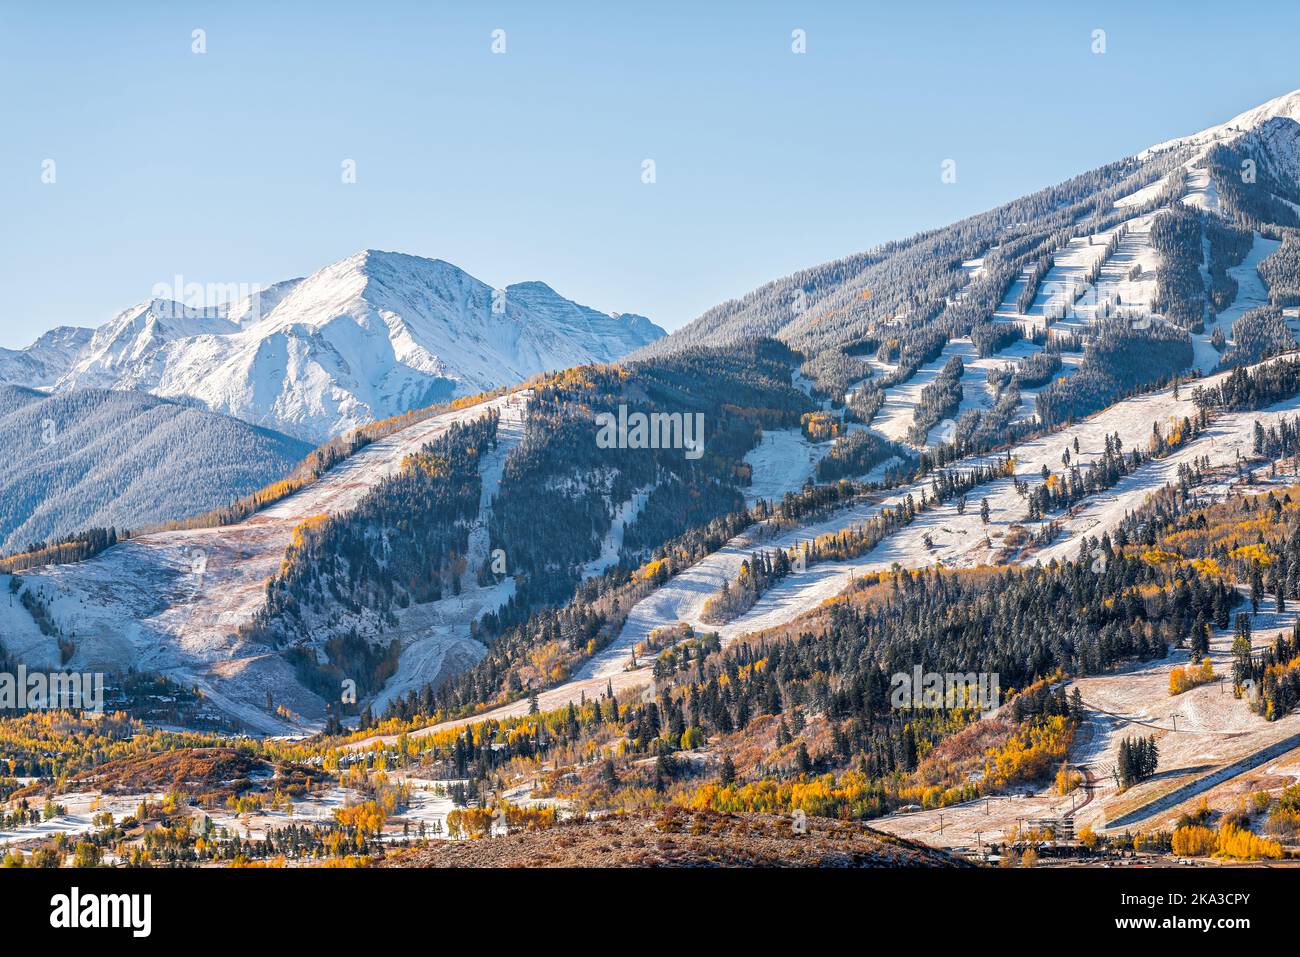 Aspen, Colorado buttermilk ski resort town slopes hill in Rocky mountains view on sunny day with winter snow on yellow foliage autumn trees Stock Photo